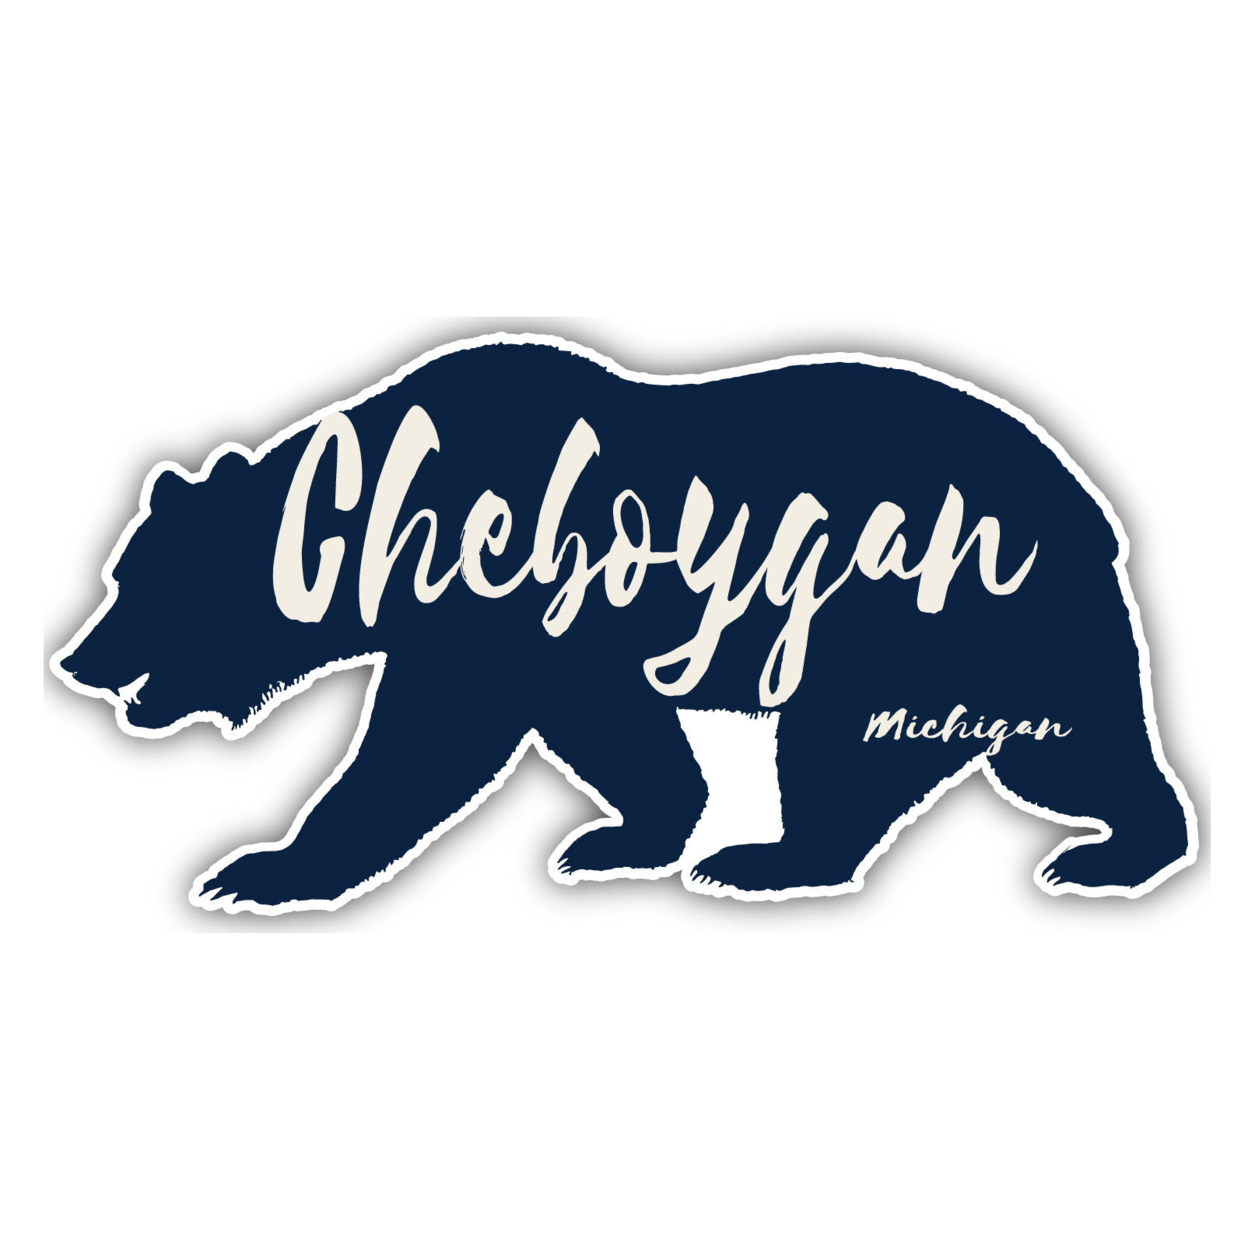 Cheboygan Michigan Souvenir Decorative Stickers (Choose Theme And Size) - 4-Pack, 2-Inch, Great Outdoors